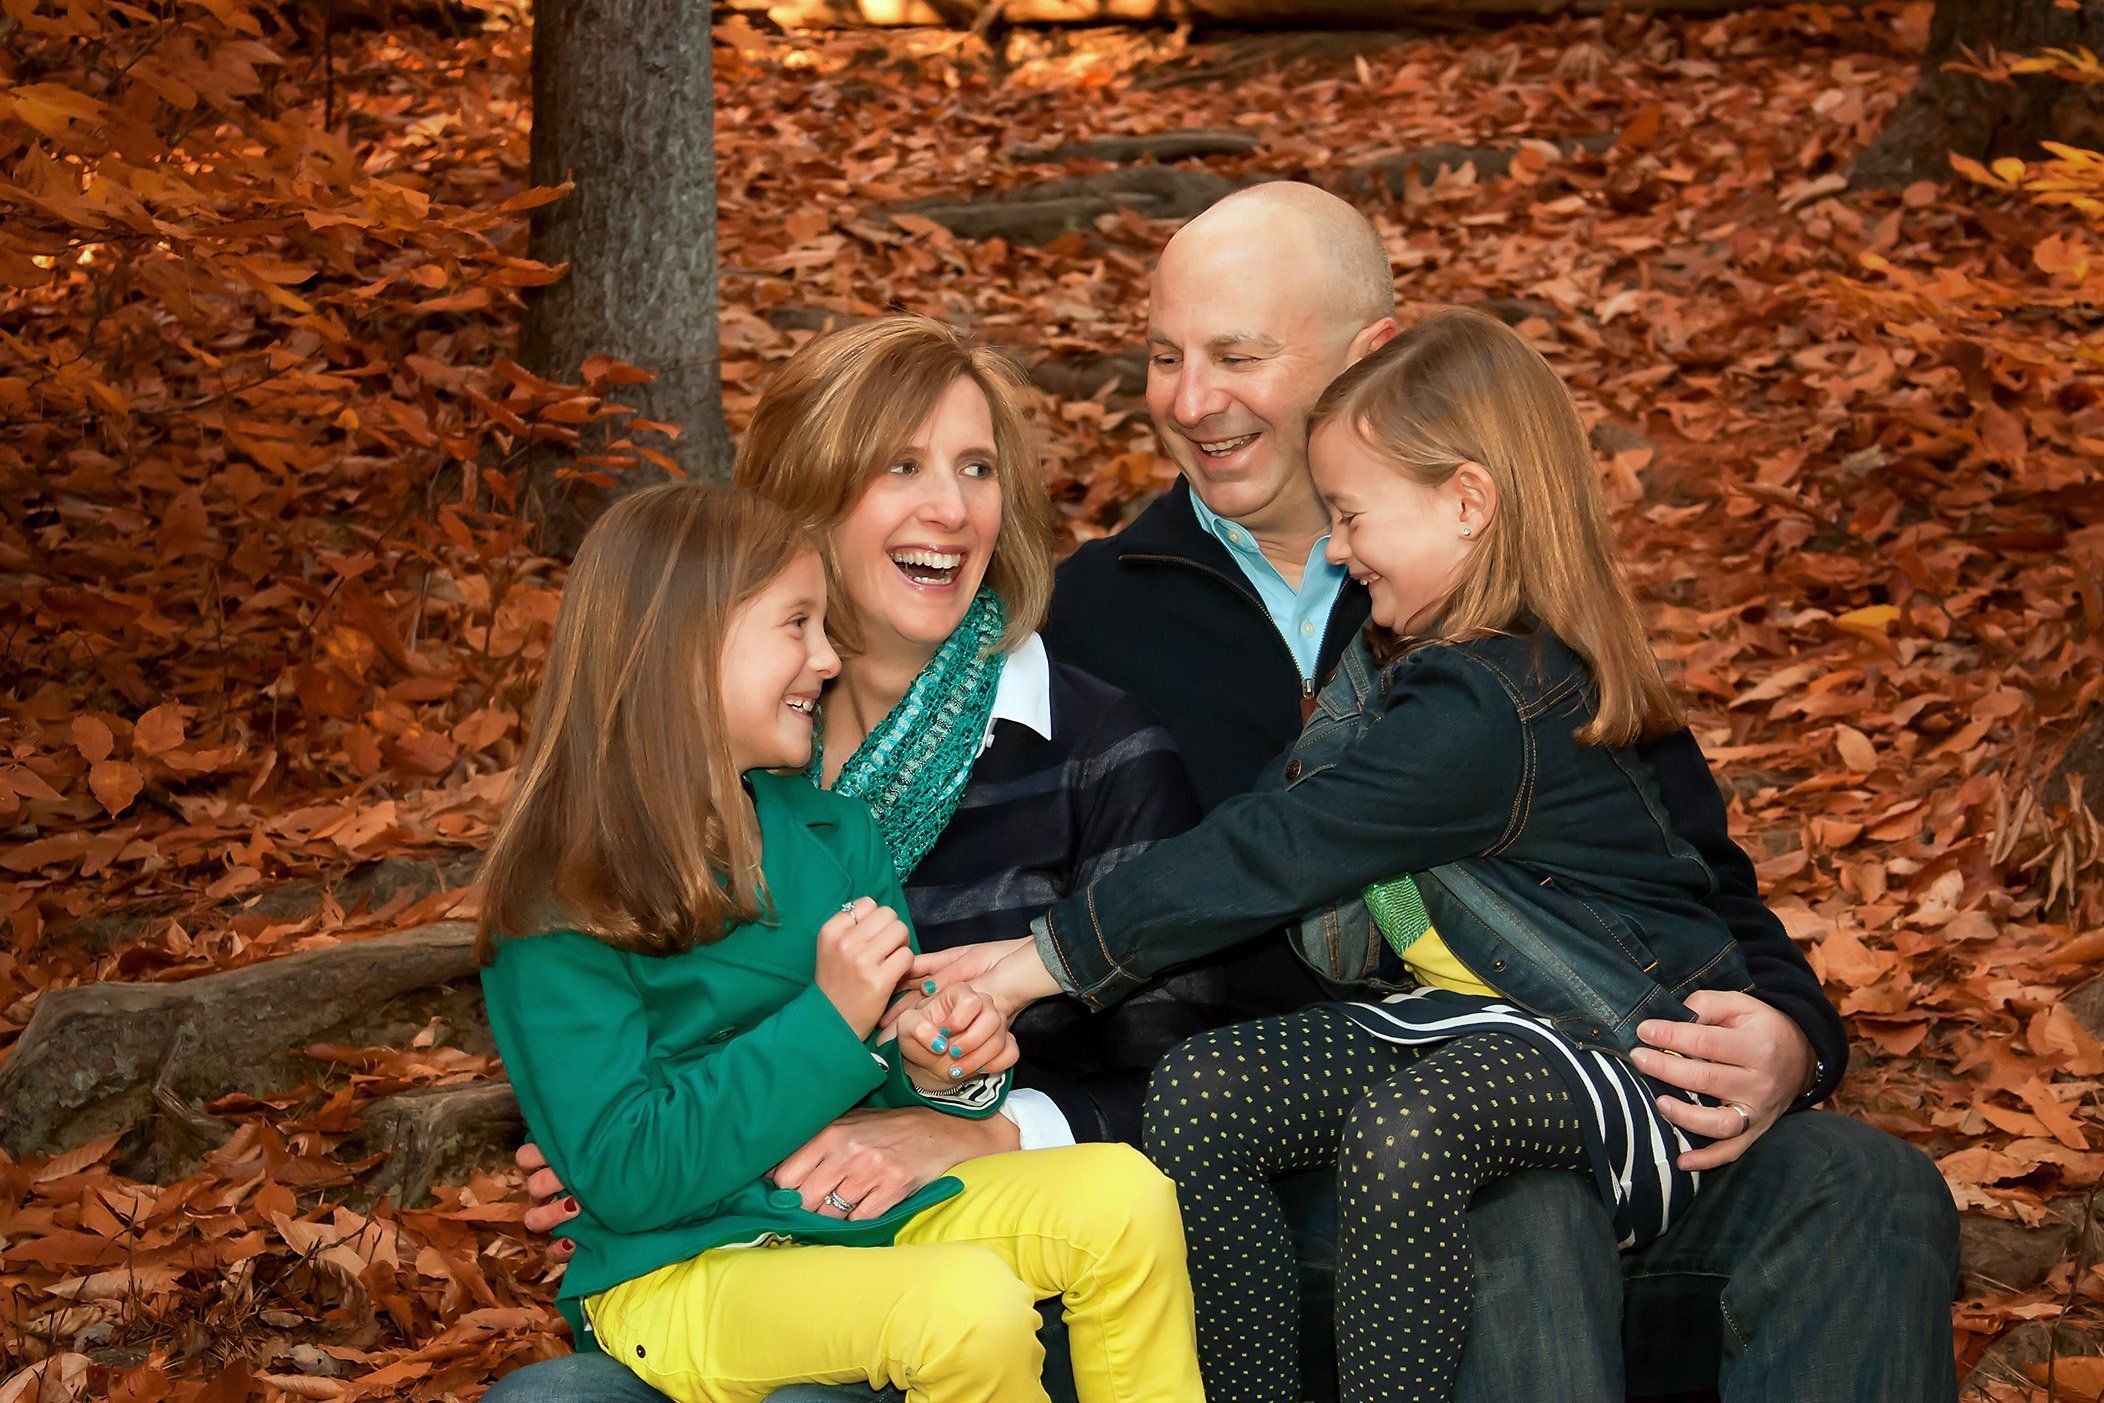 Mom, Dad and twin 7 year old girls sitting in orange fall leaves and laughing together